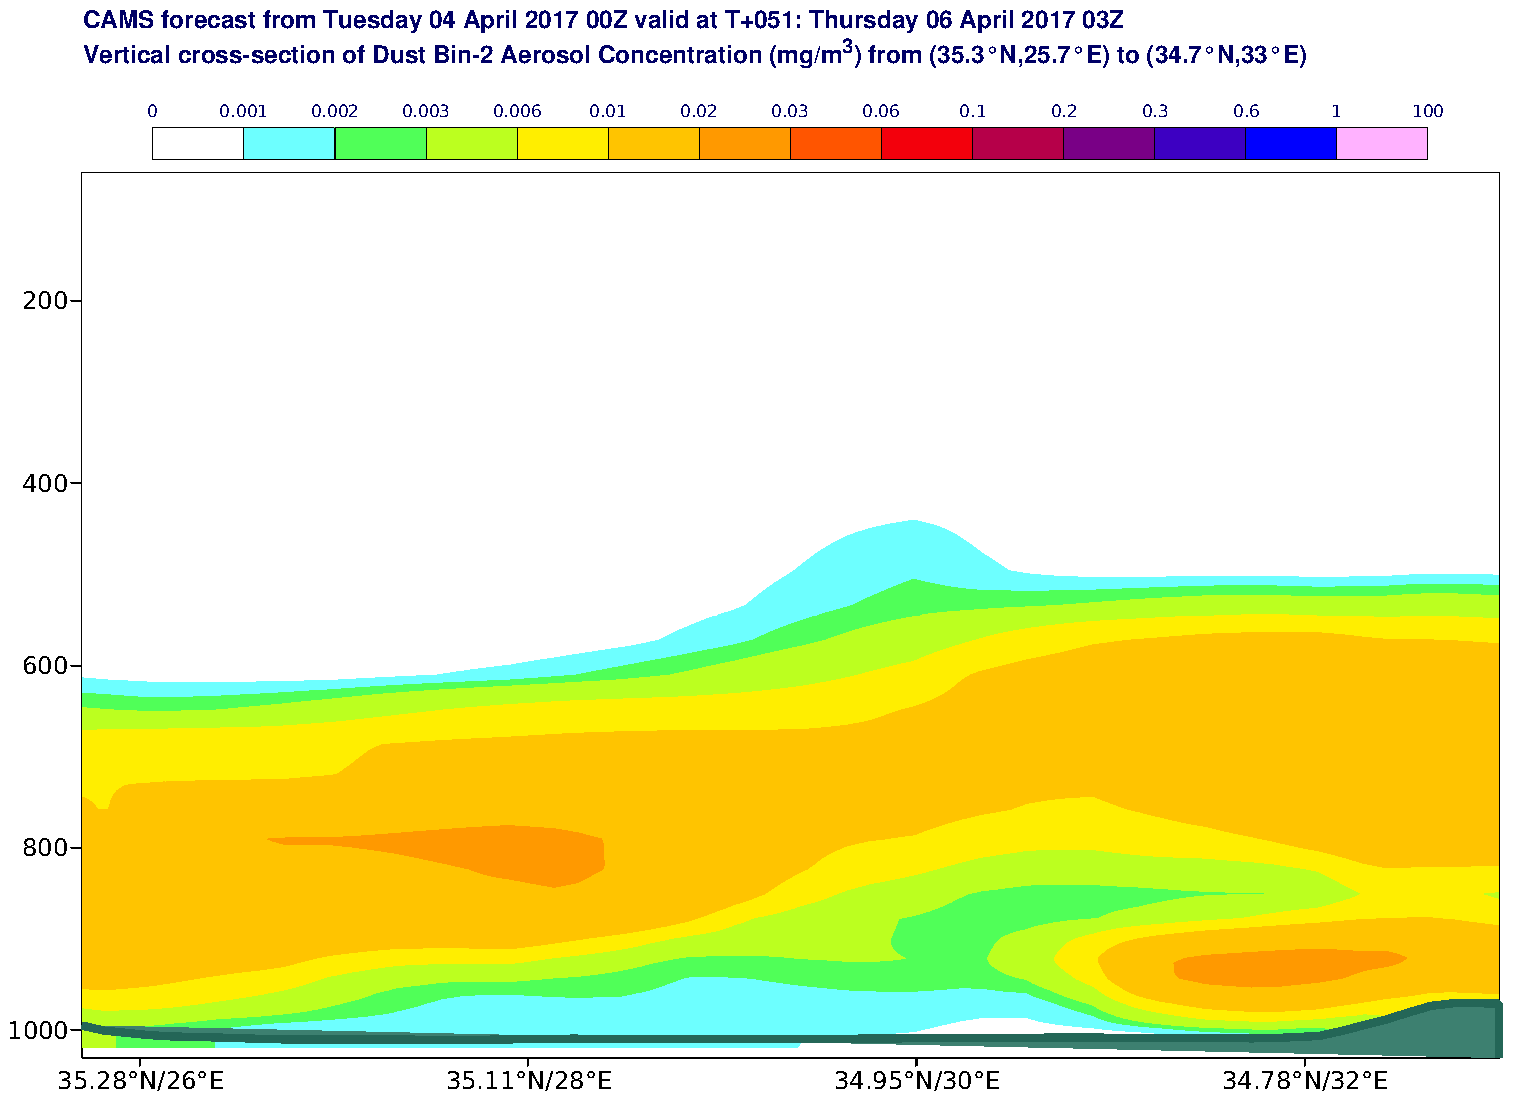 Vertical cross-section of Dust Bin-2 Aerosol Concentration (mg/m3) valid at T51 - 2017-04-06 03:00